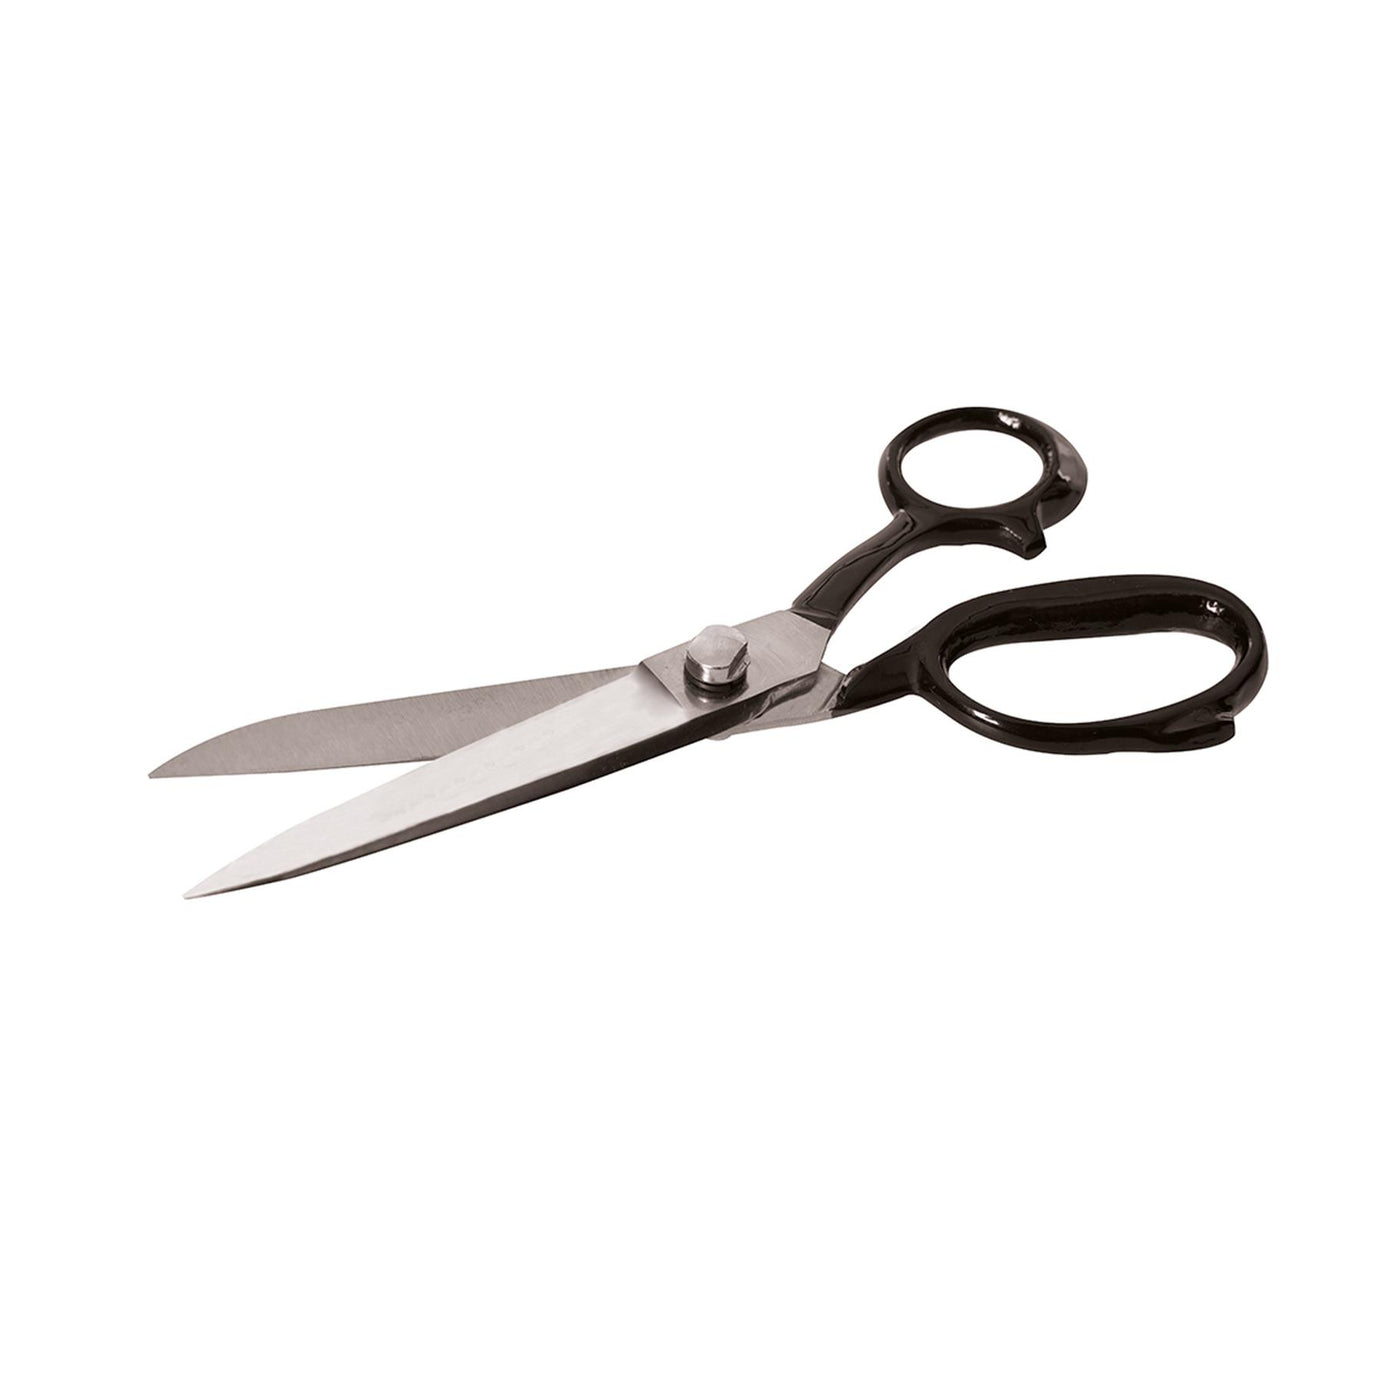 Tailor Scissors - 200mm (8") Stainless Steel With Precision-Ground Blades